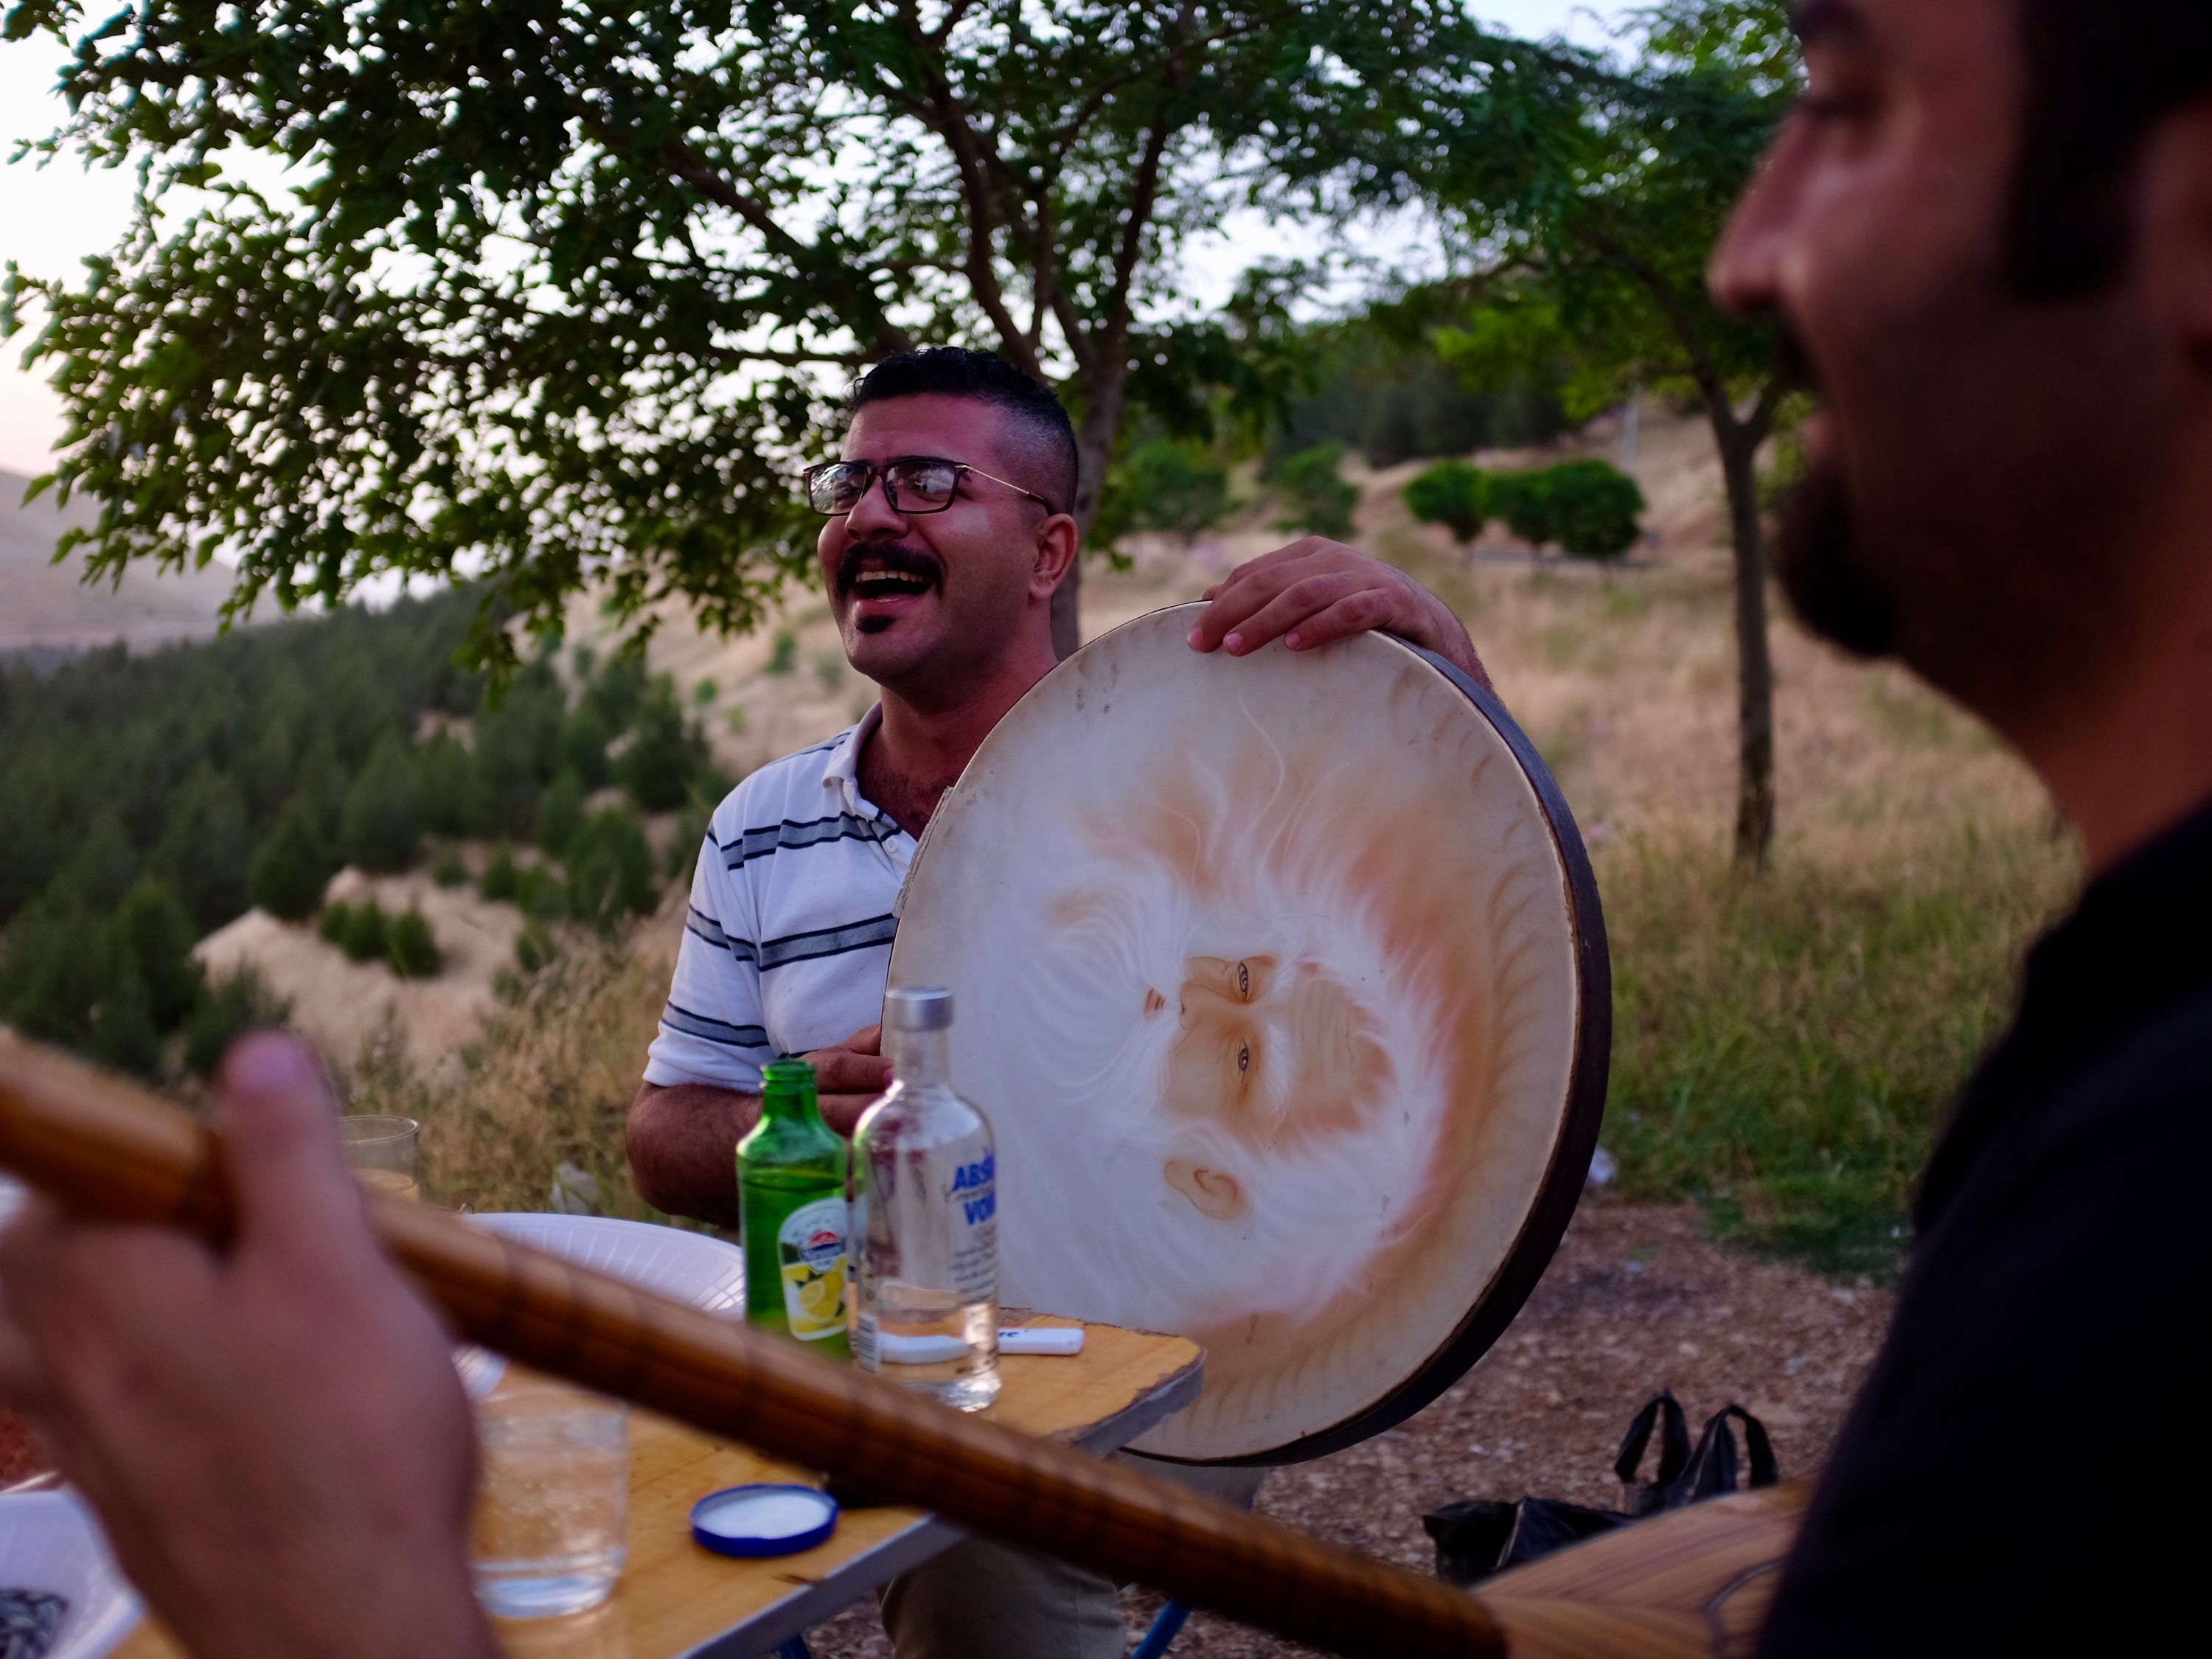 A man plays a large, handheld drum, and another a guitar-like instrument at a table on a hillside in the evening light.